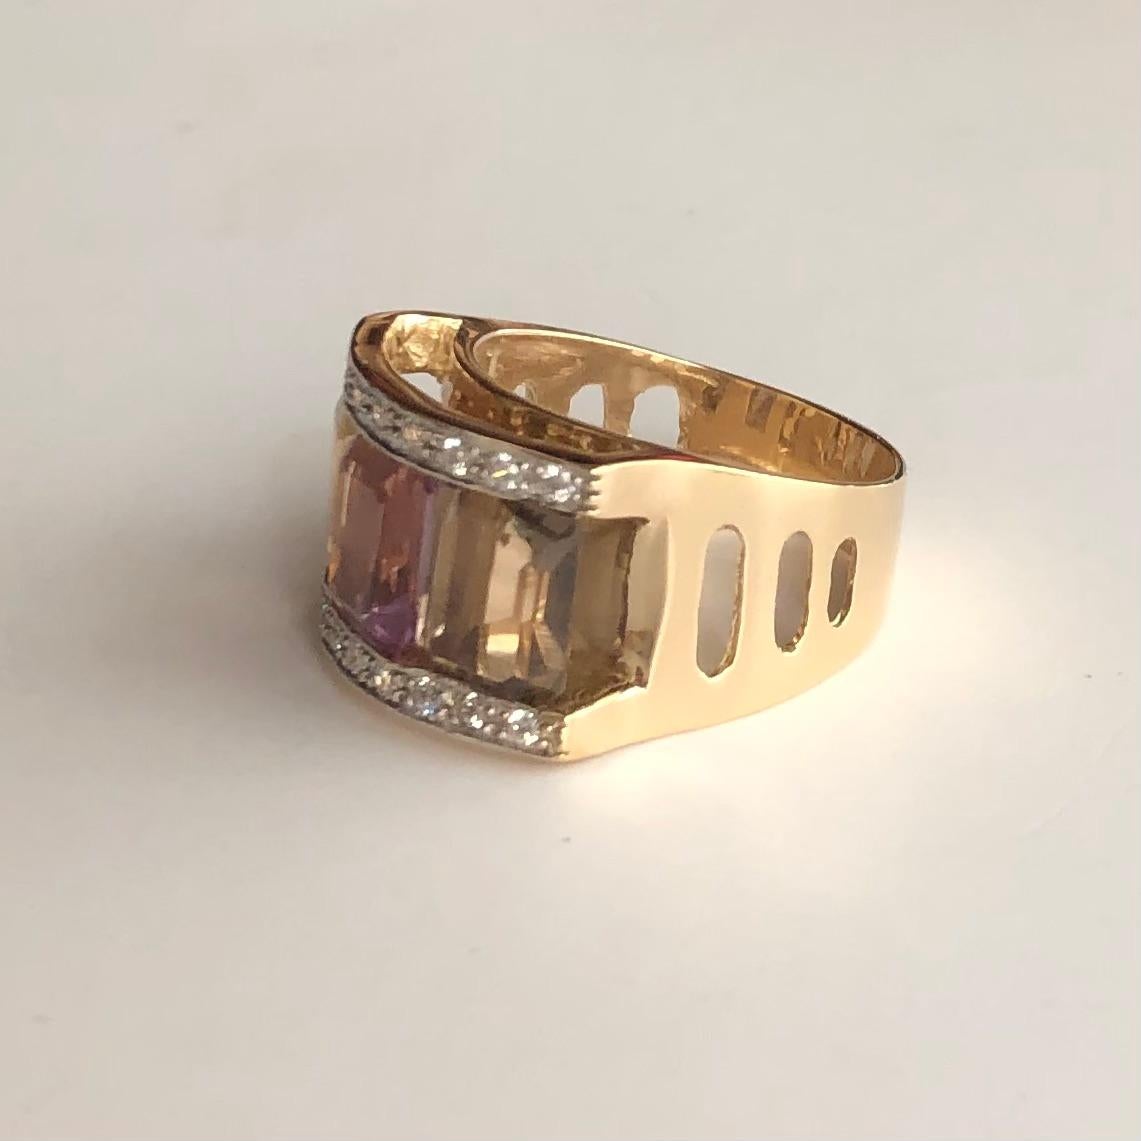 Cocktail ring in 18 karat yellow gold with diamonds set on white gold and three coloured central stones, 1 amethyst, 1 orange quartz and 1 green quartz, set with great mastery in the symmetry and alignment of the setting of the 3 stones.

The ajour